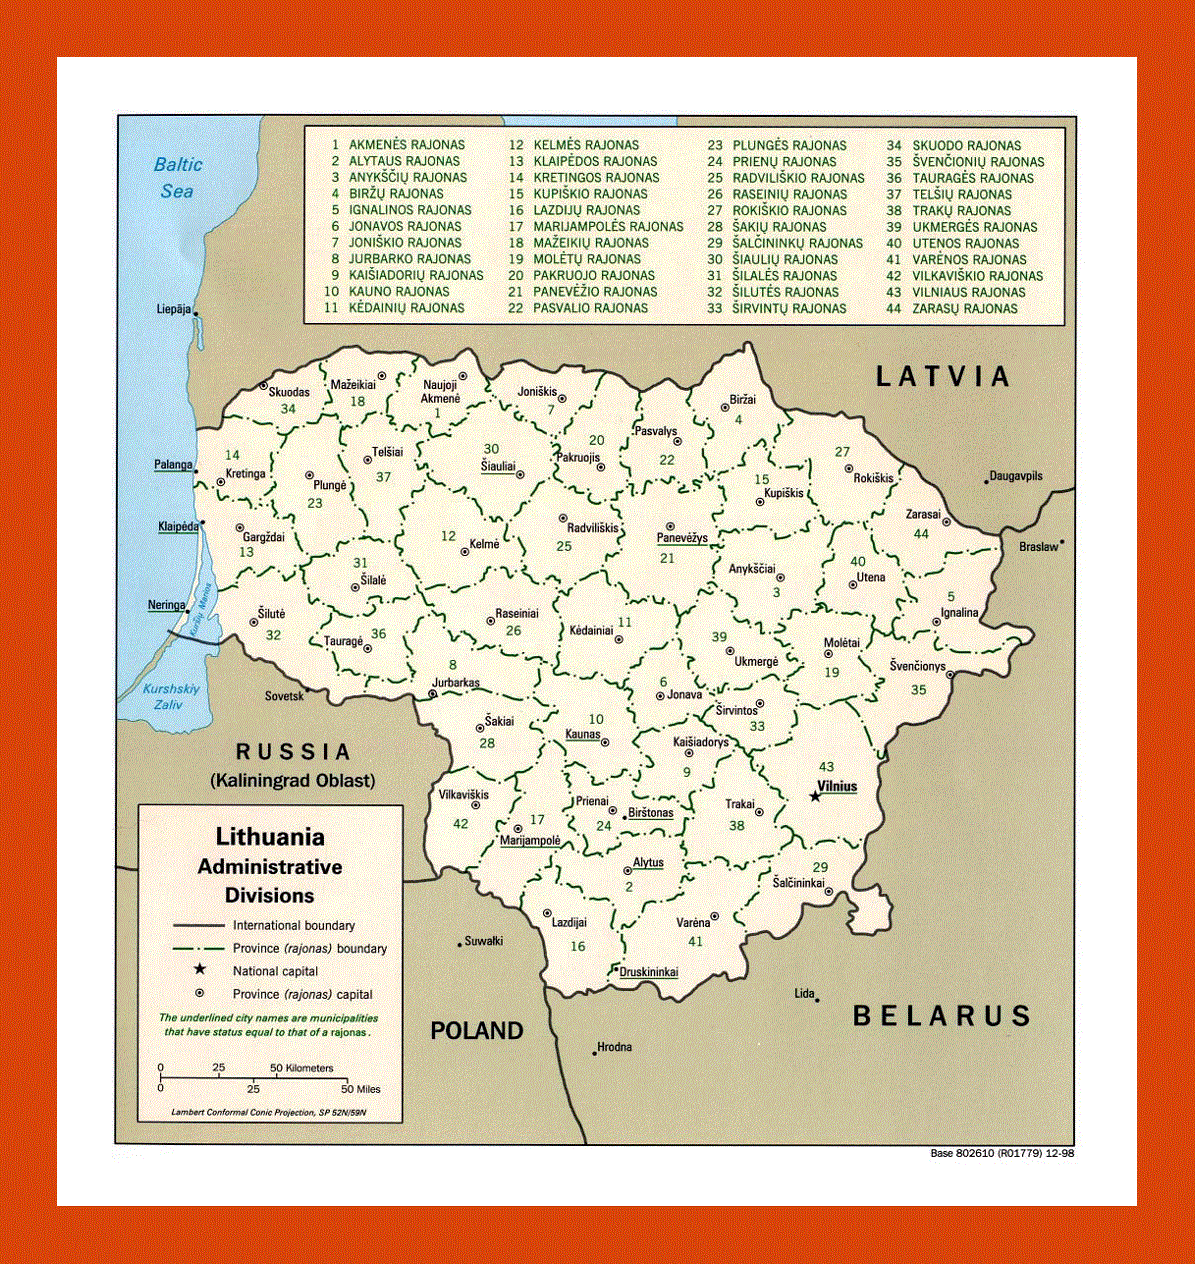 Administrative divisions map of Lithuania - 1998